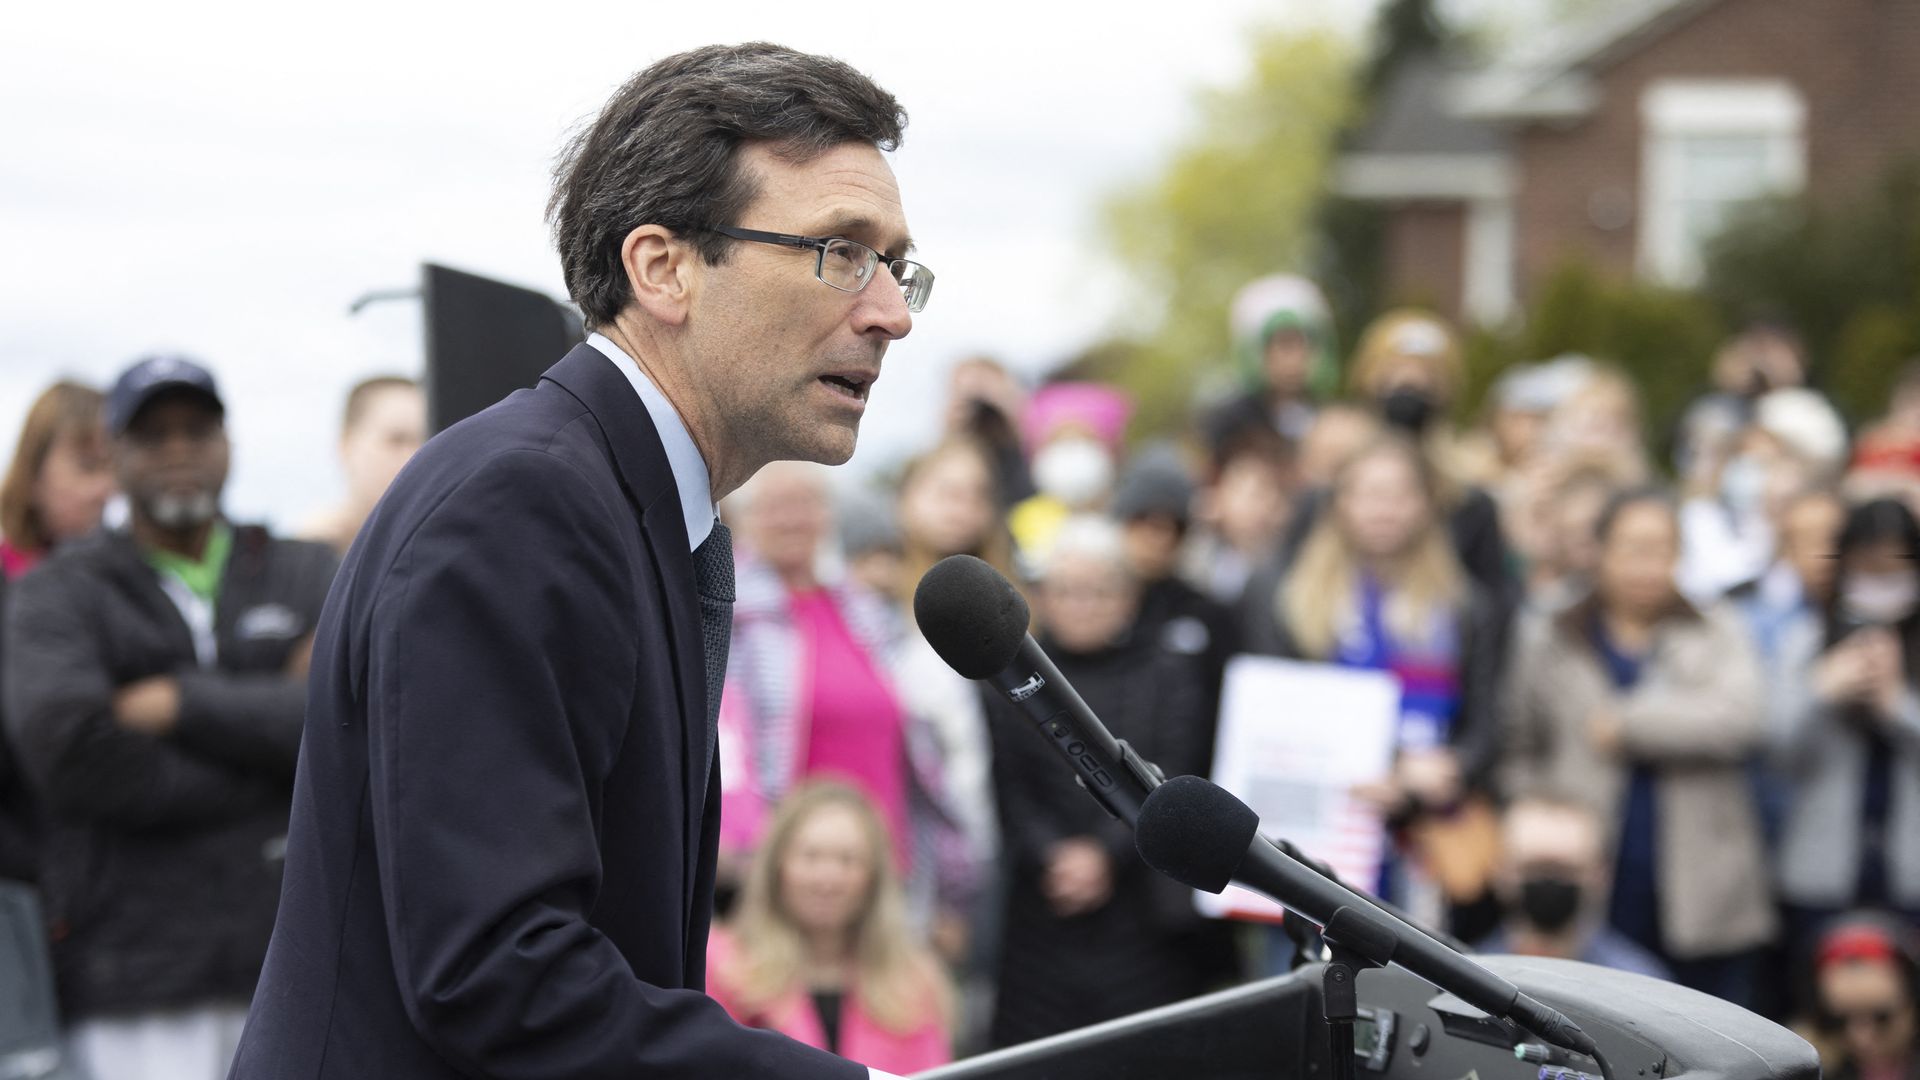 A man with short brown hair and glasses in a dark suit speaks at a podium with a crowd in the background.